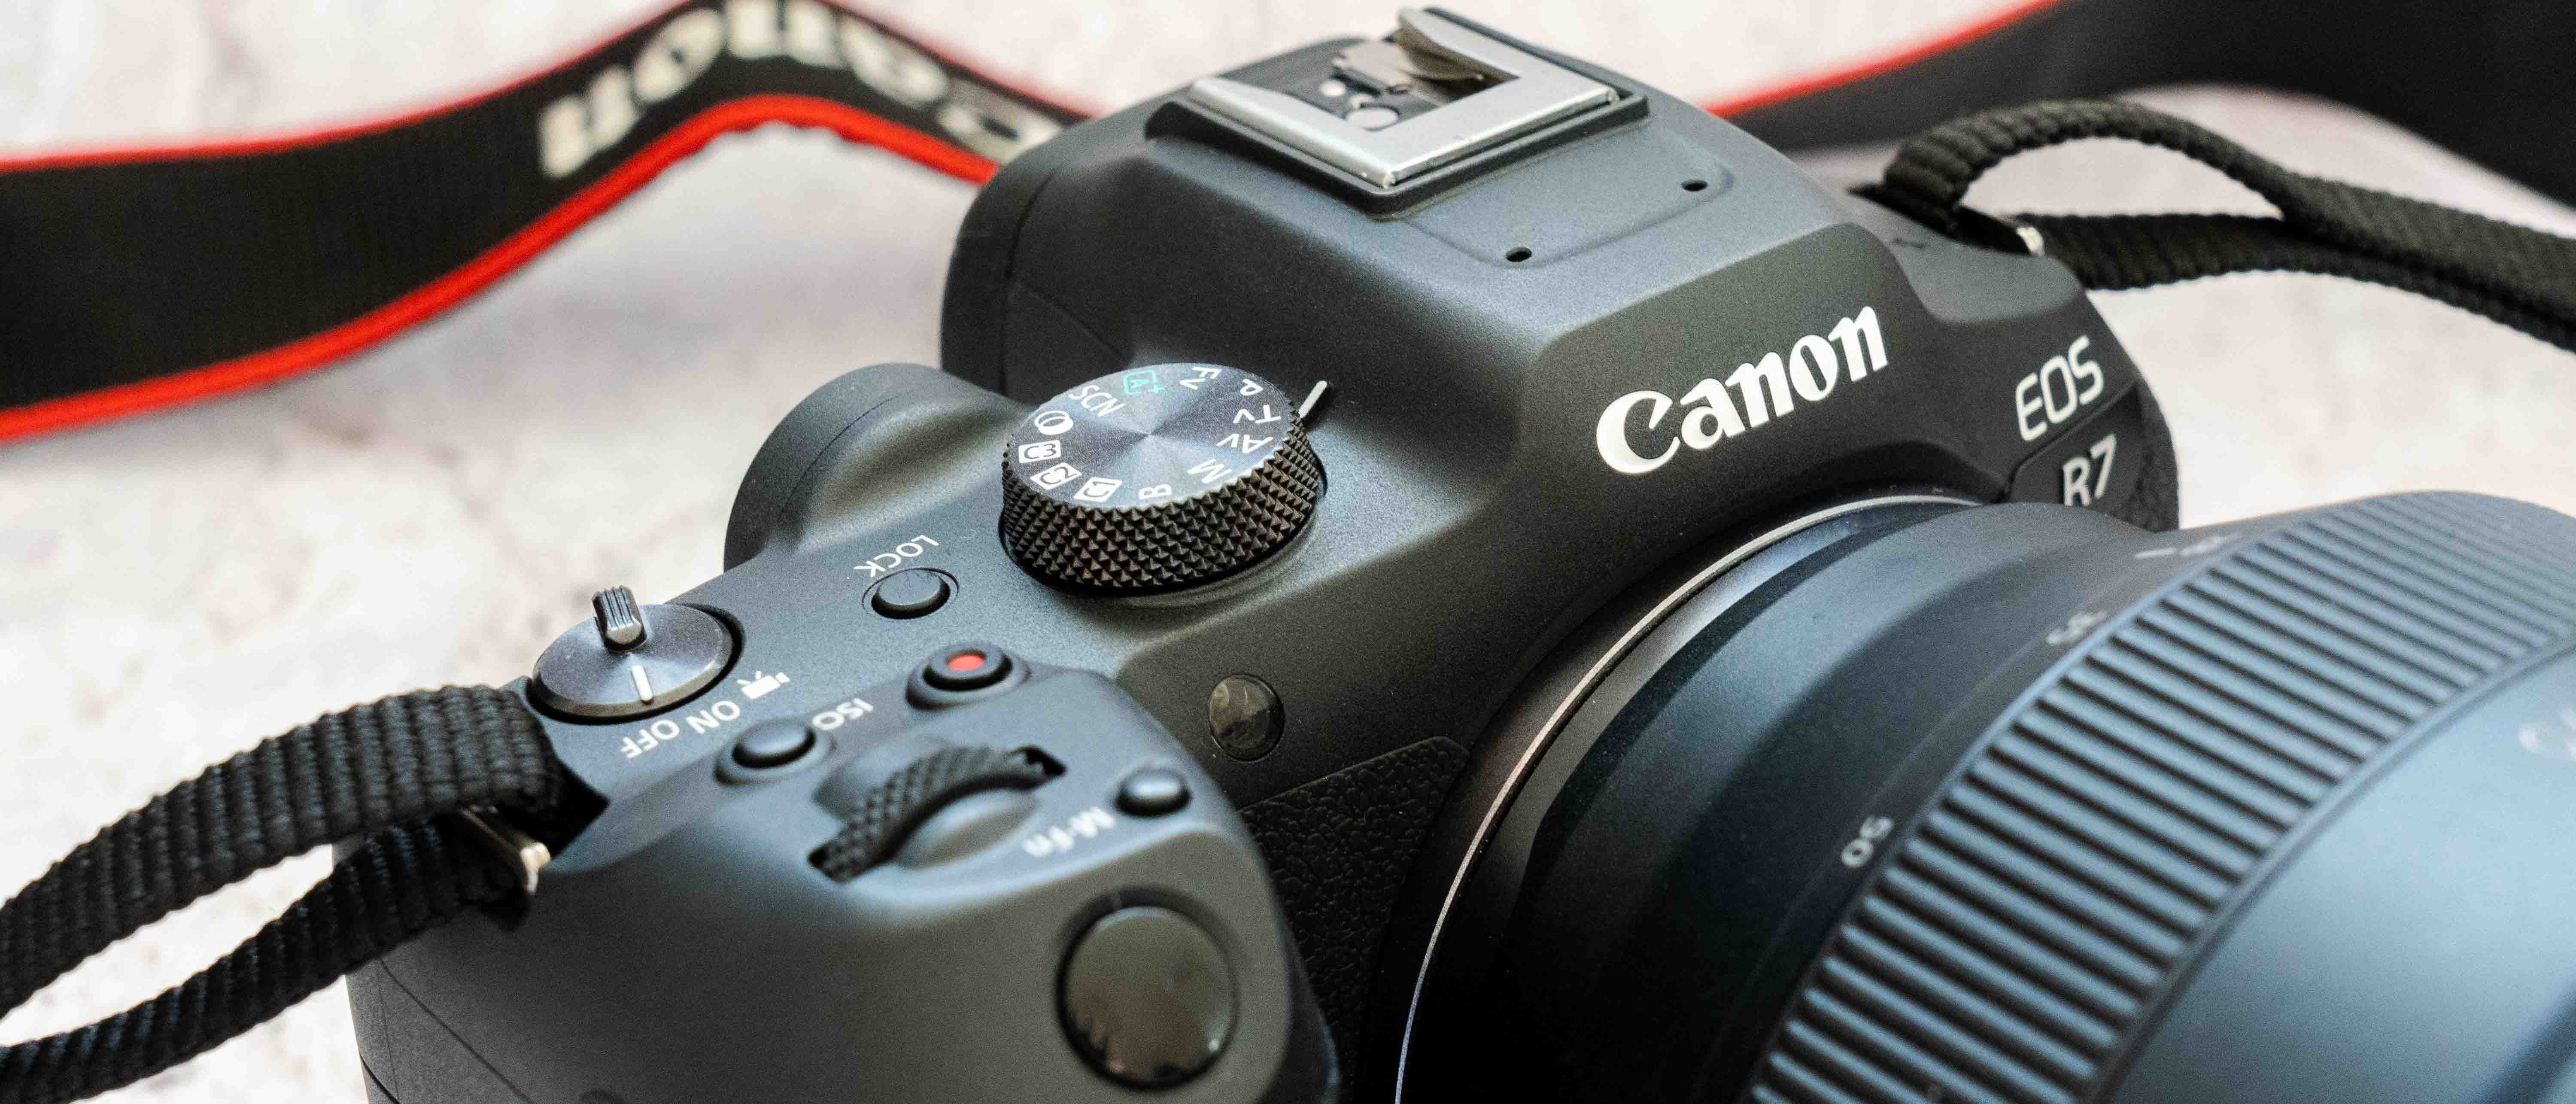 Hands-on with Canon's EOS R7 APS-C mirrorless camera: Digital